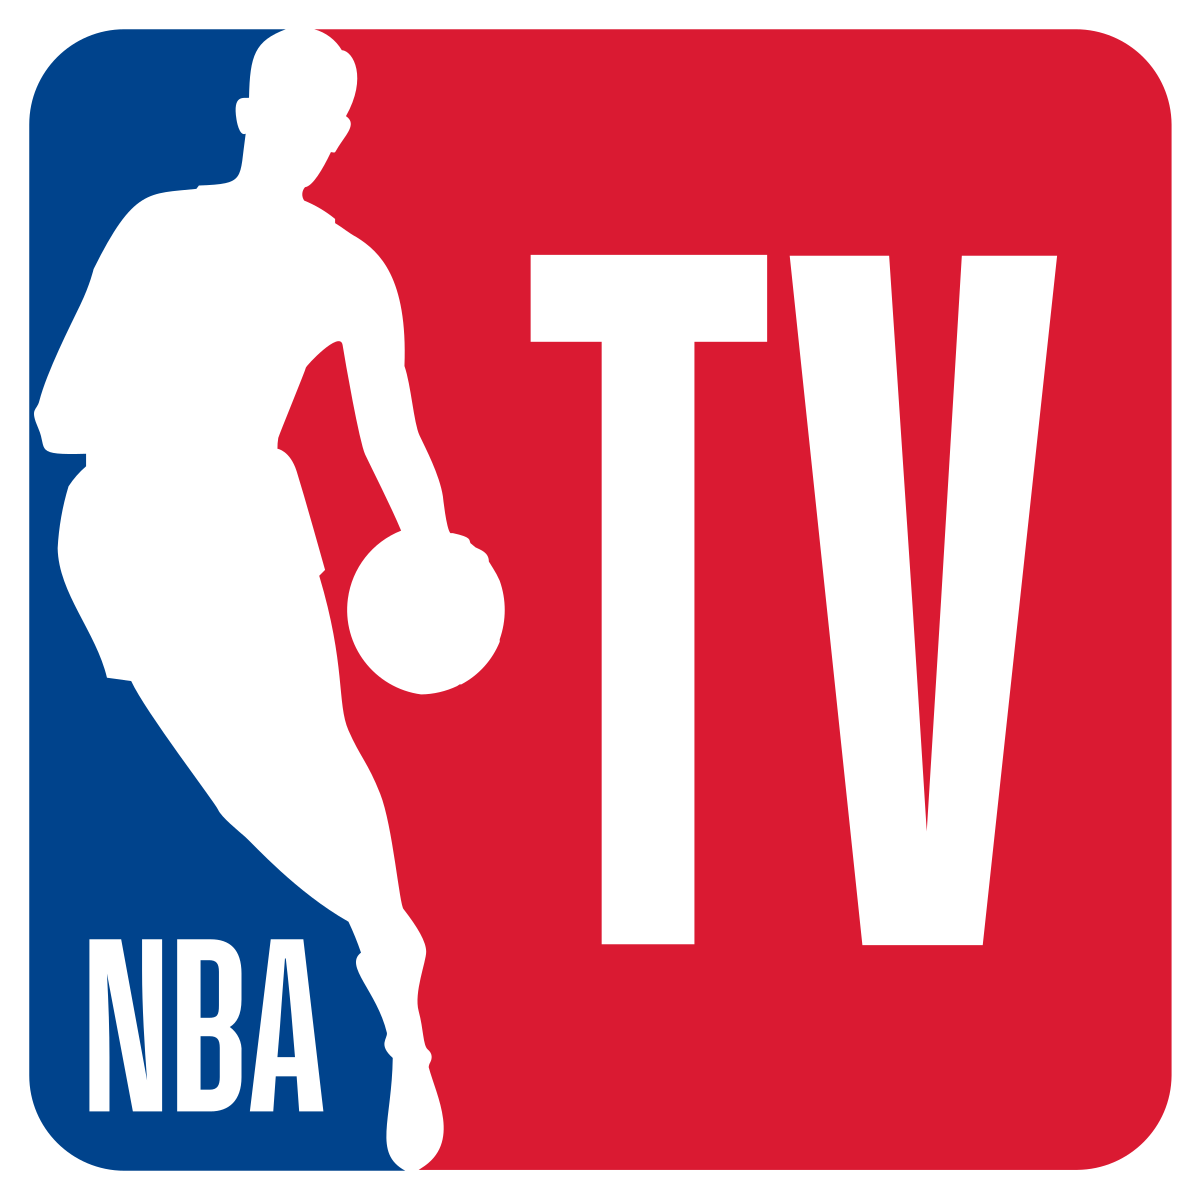 NBA TVs Expansive Coverage of NBA All-Star 2023 to Include Live and Original Programming from Salt Lake City Starting Friday, Feb